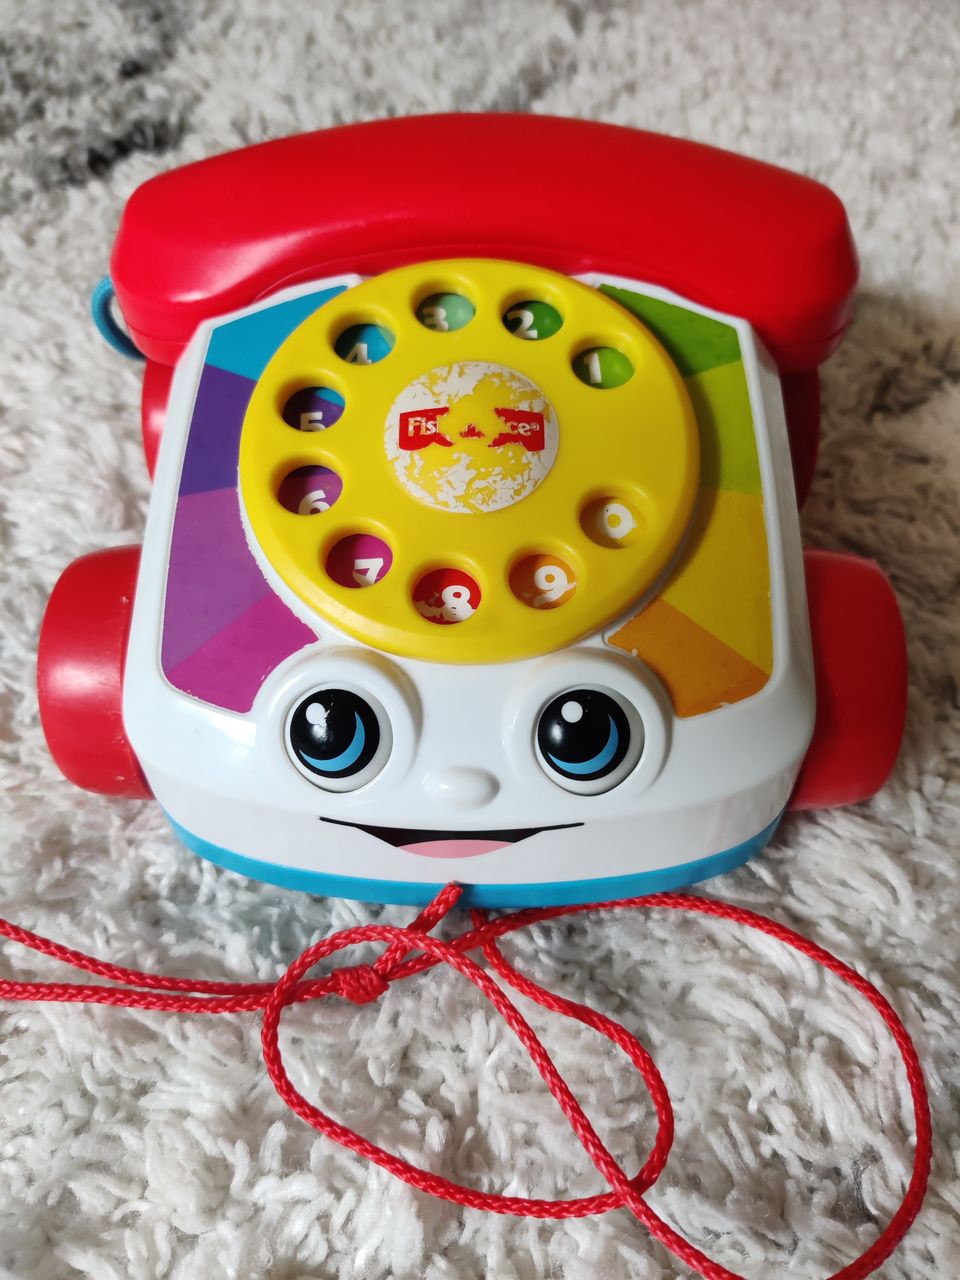 Fisher Price Chatter-puhelin